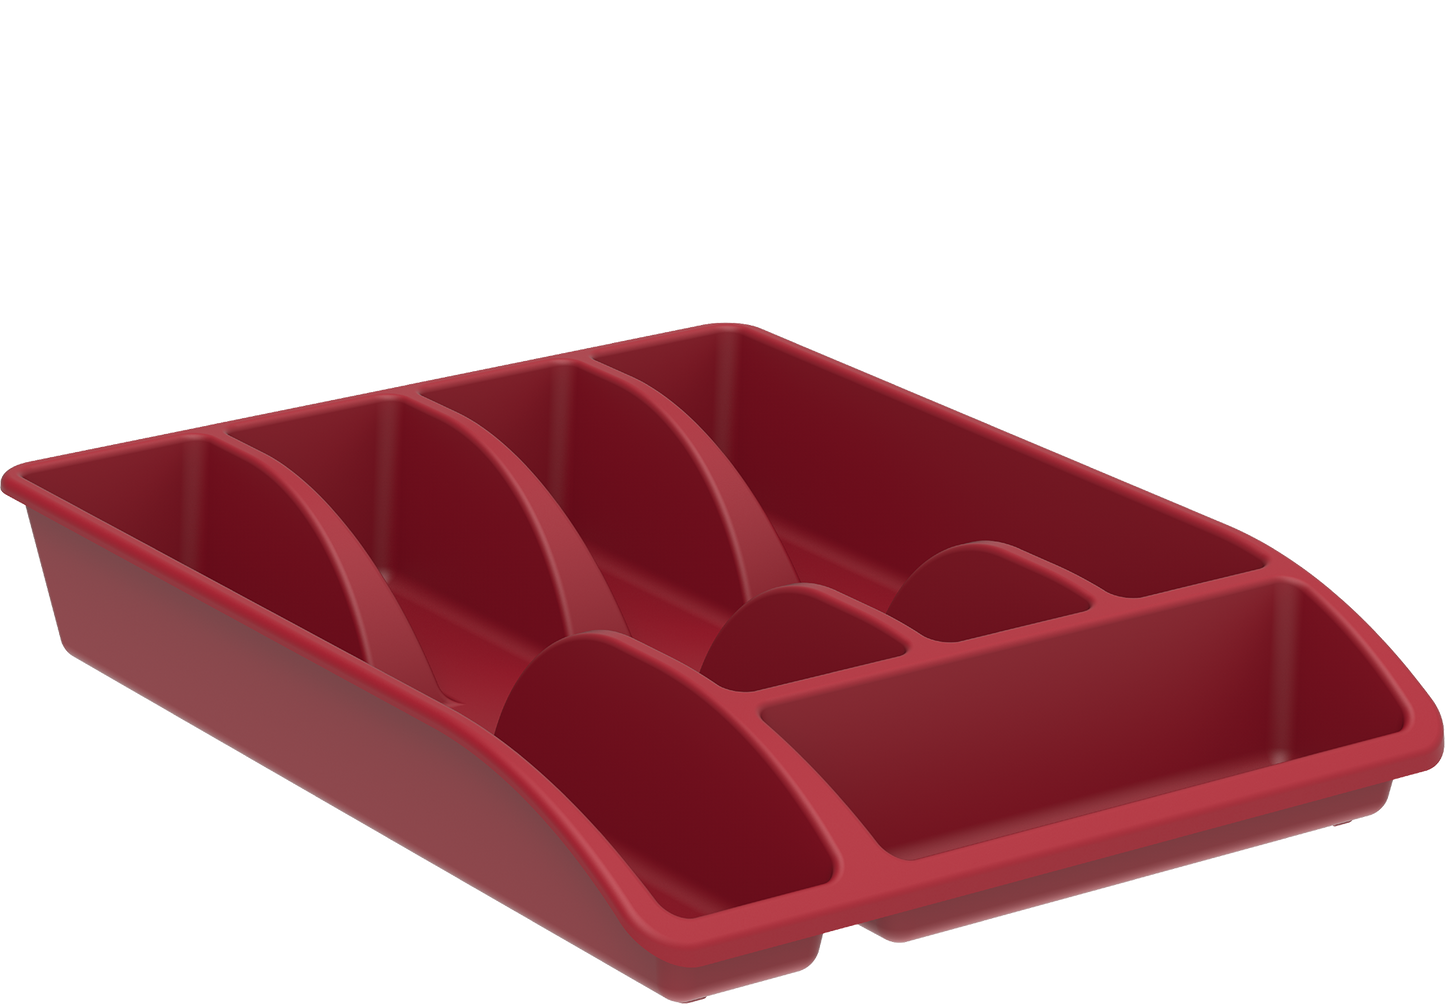 5 Compartment Cutlery Tray - Cosmoplast Bahrain